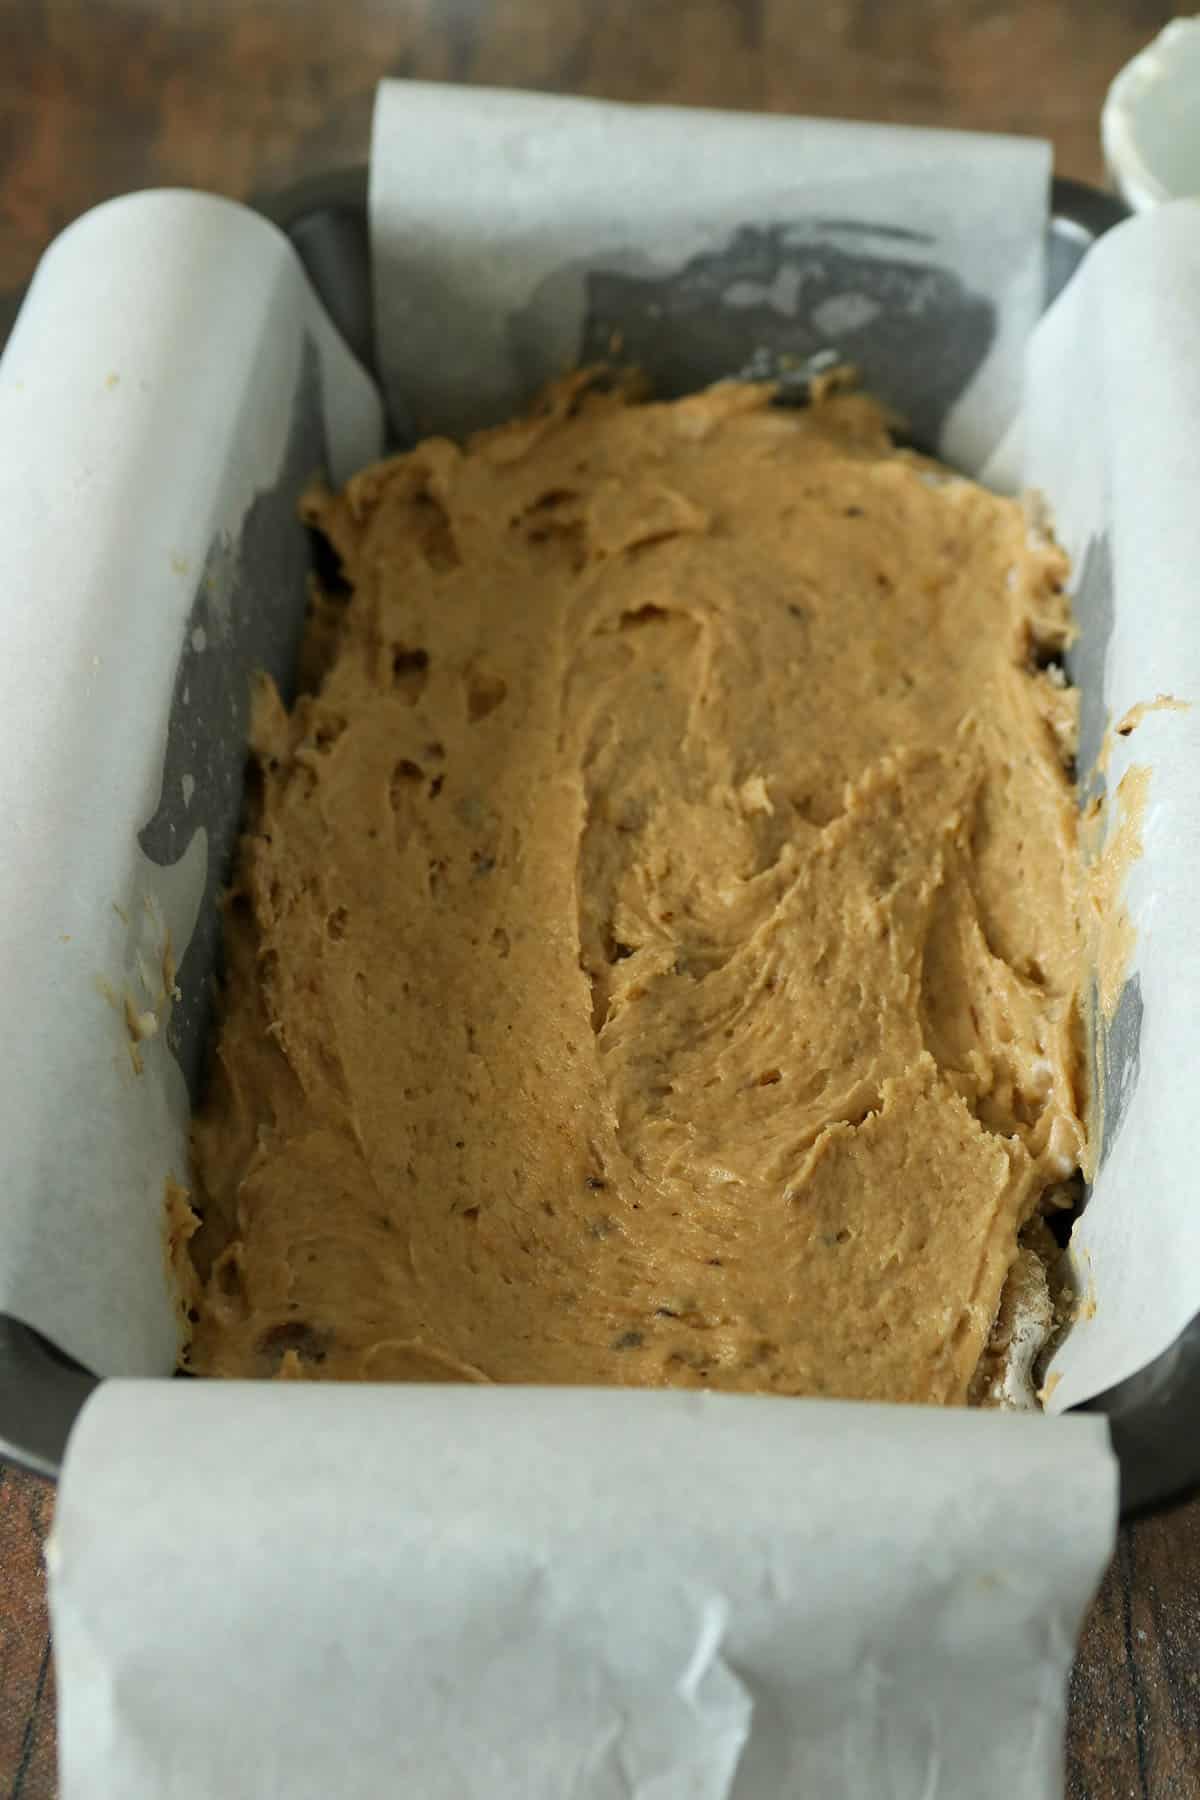 The Coffee Cake Banana bread batter in a loaf pan.